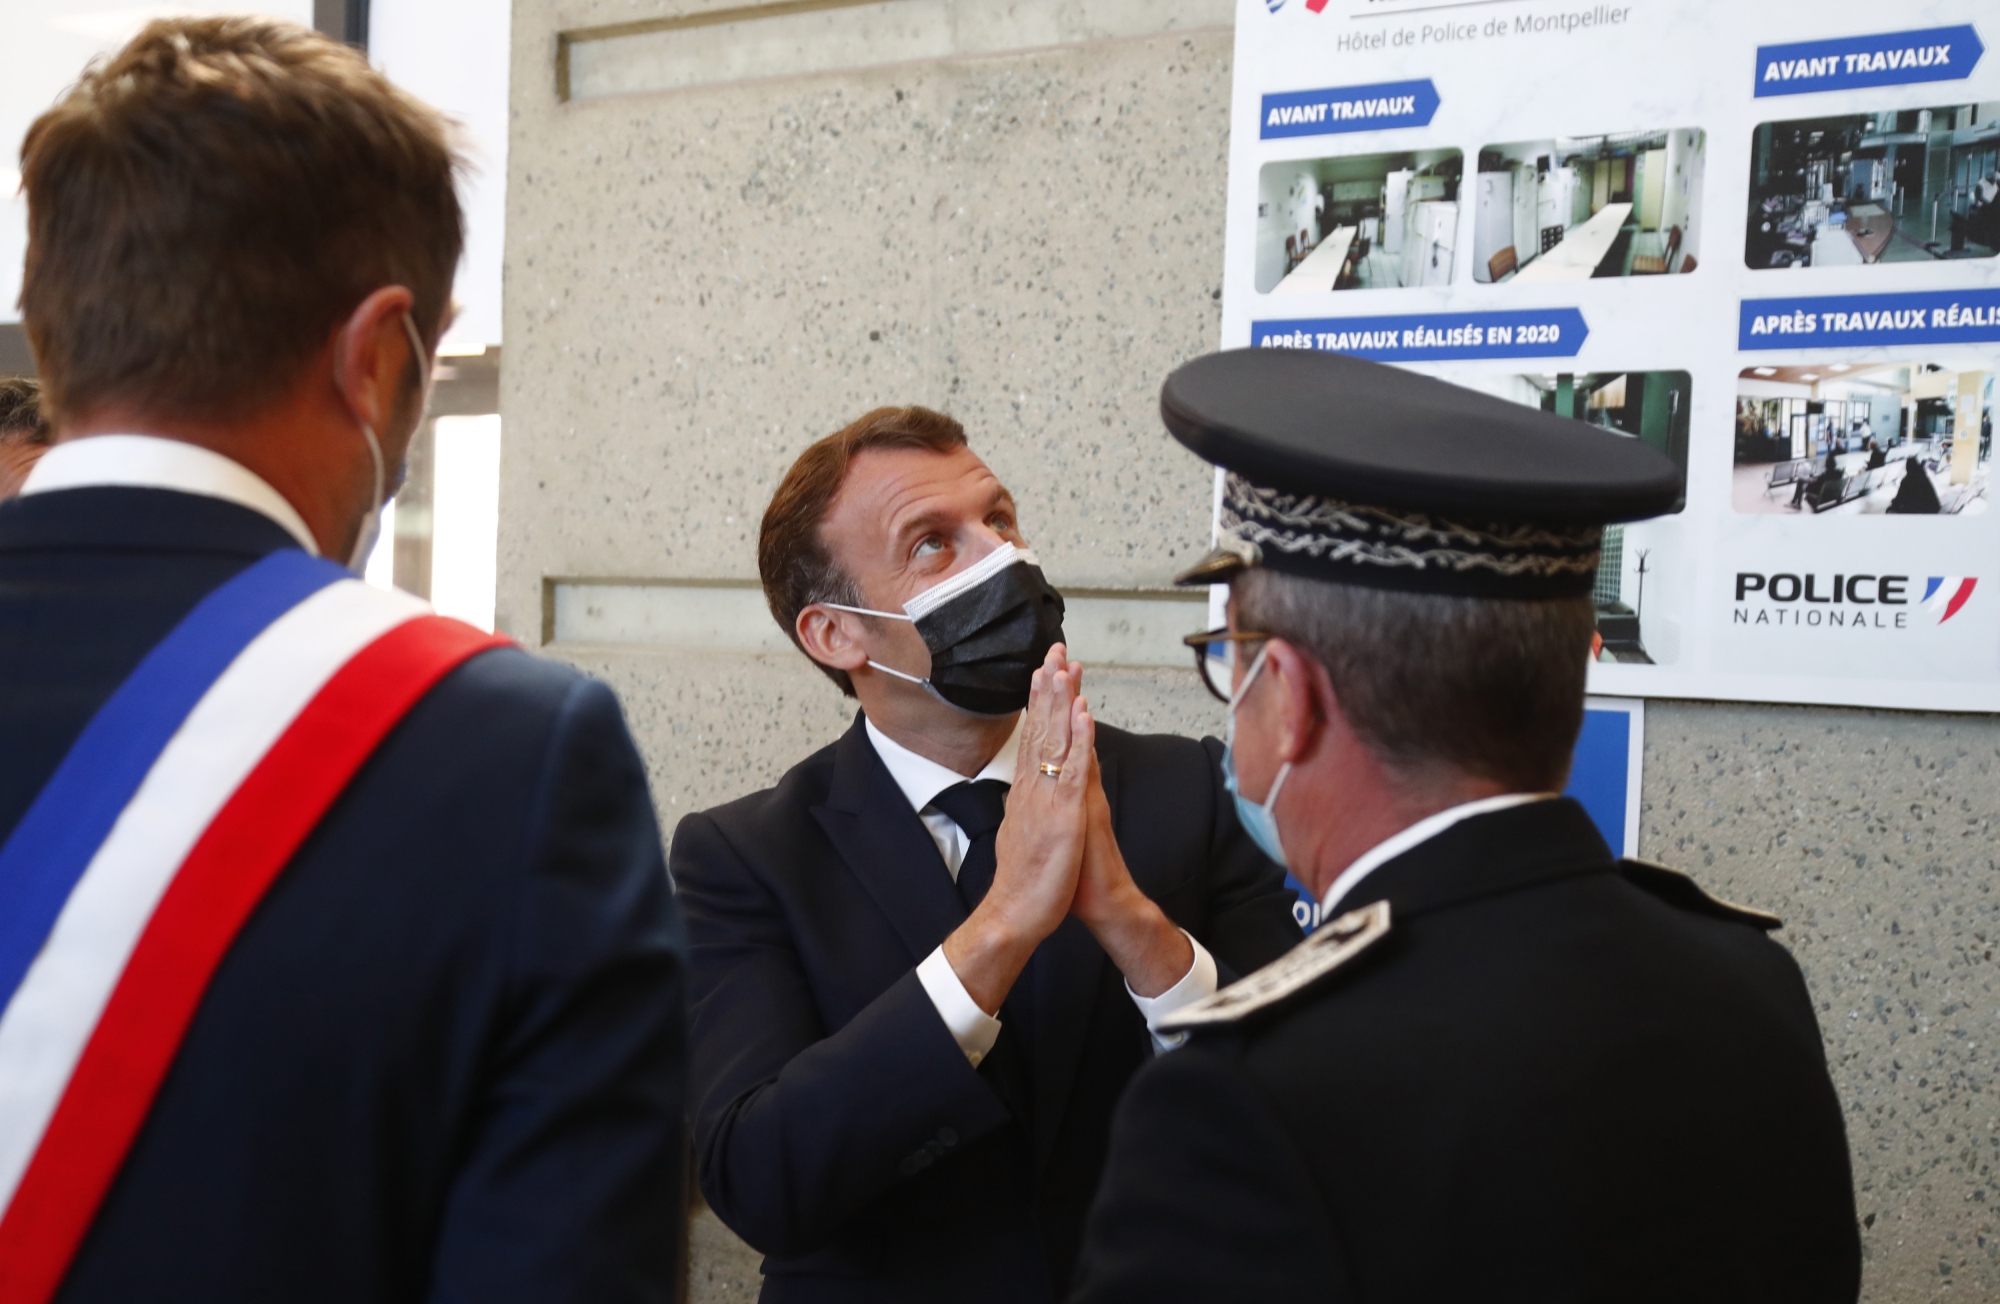 French President Emmanuel Macron visits the police headquarters in Montpellier, Southern France, Monday April, 19, 2021, accompanied by his Minister of Interior, Gerald Darmanin, during a one day visit to Montpellier on the theme of security and police. (Guillaume Horcajuelo/pool photo via AP)